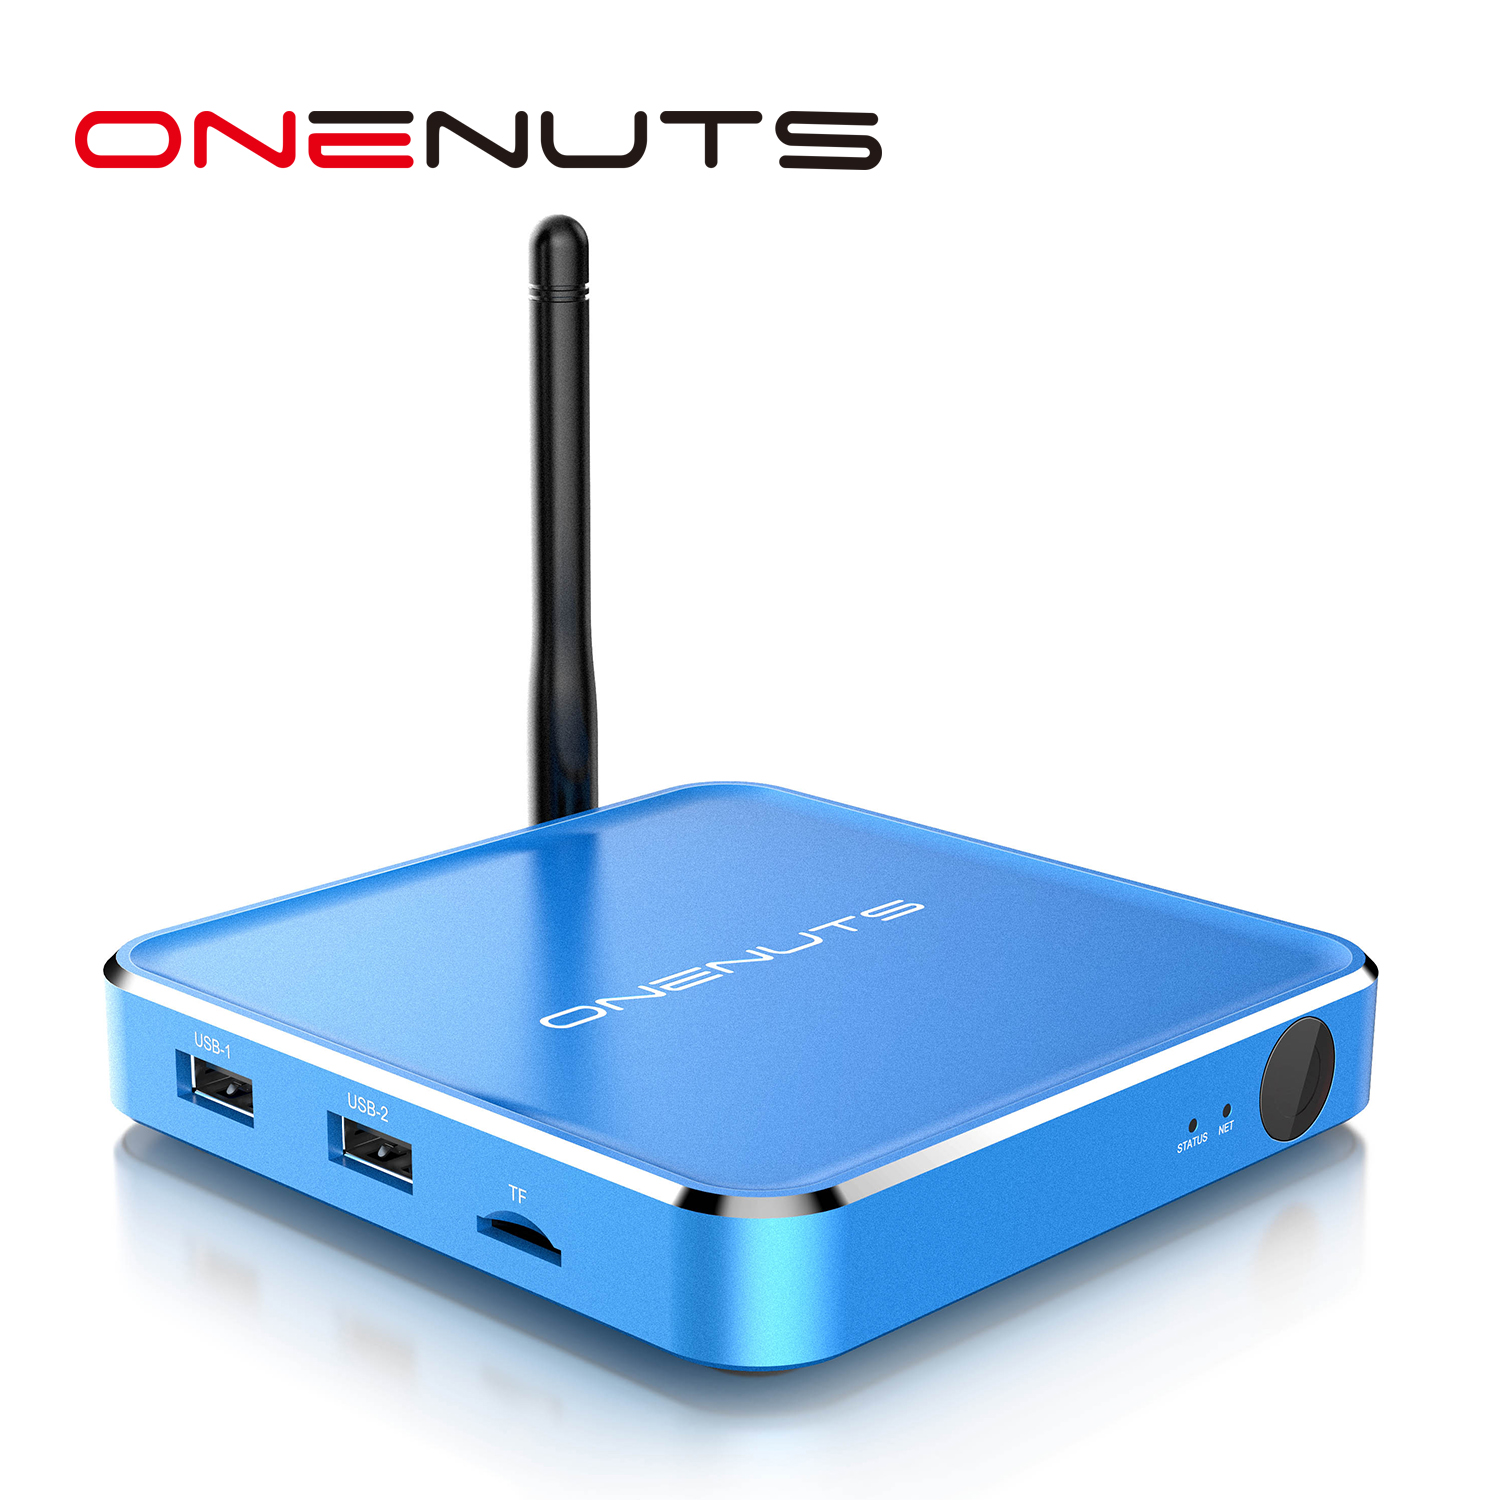 Android TV Box China Fornecedor Notícias Android TV Box com Android 6.0